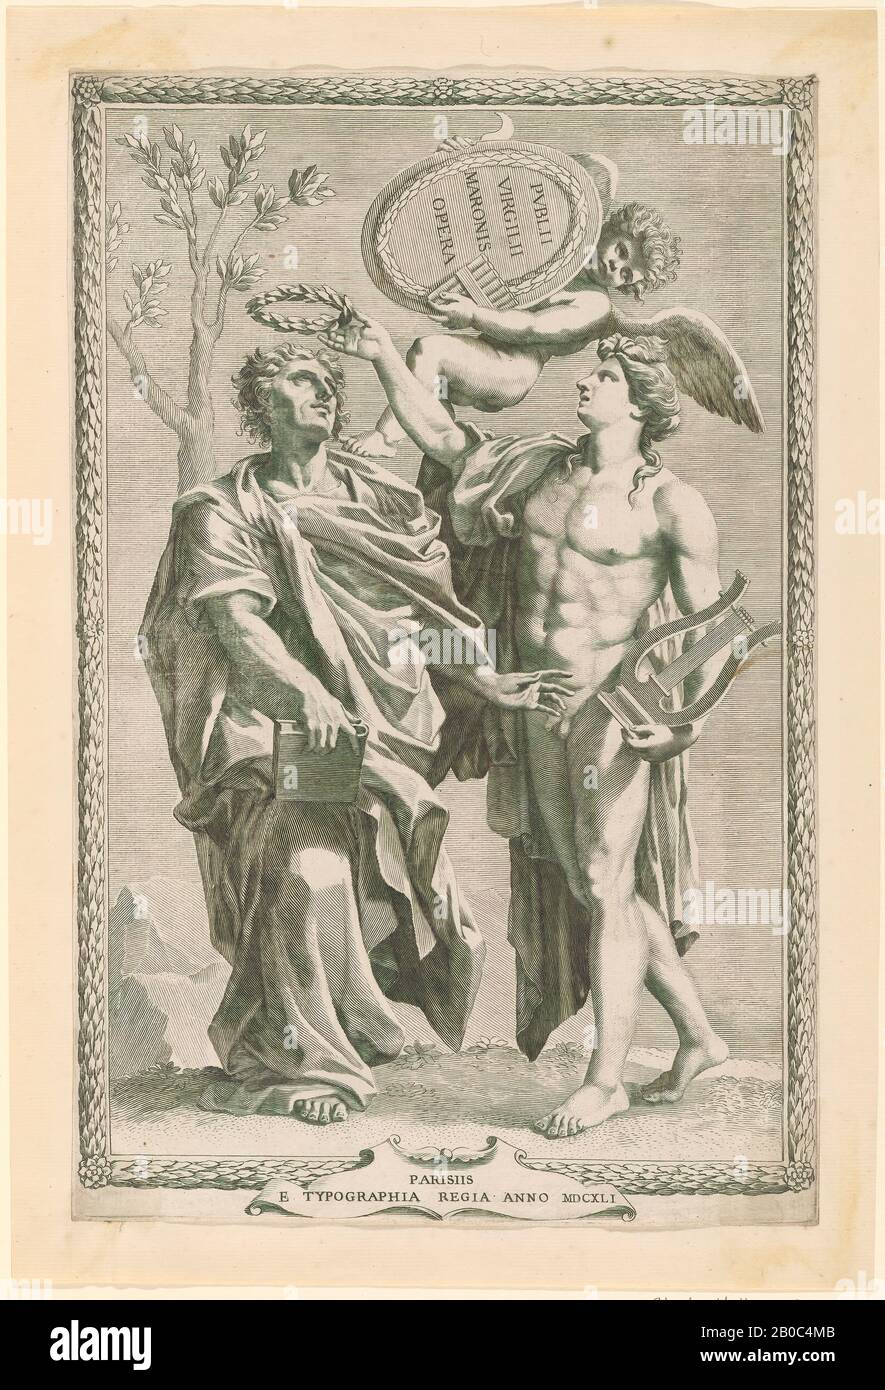 Claude Mellan, Title Page to Virgil's Works, after Nicolas Poussin, 1641, Gravur on creme antique laid paper, 14 1/4 in. X 9 1/4 in. (36,2 x 23,5 cm Stockfoto